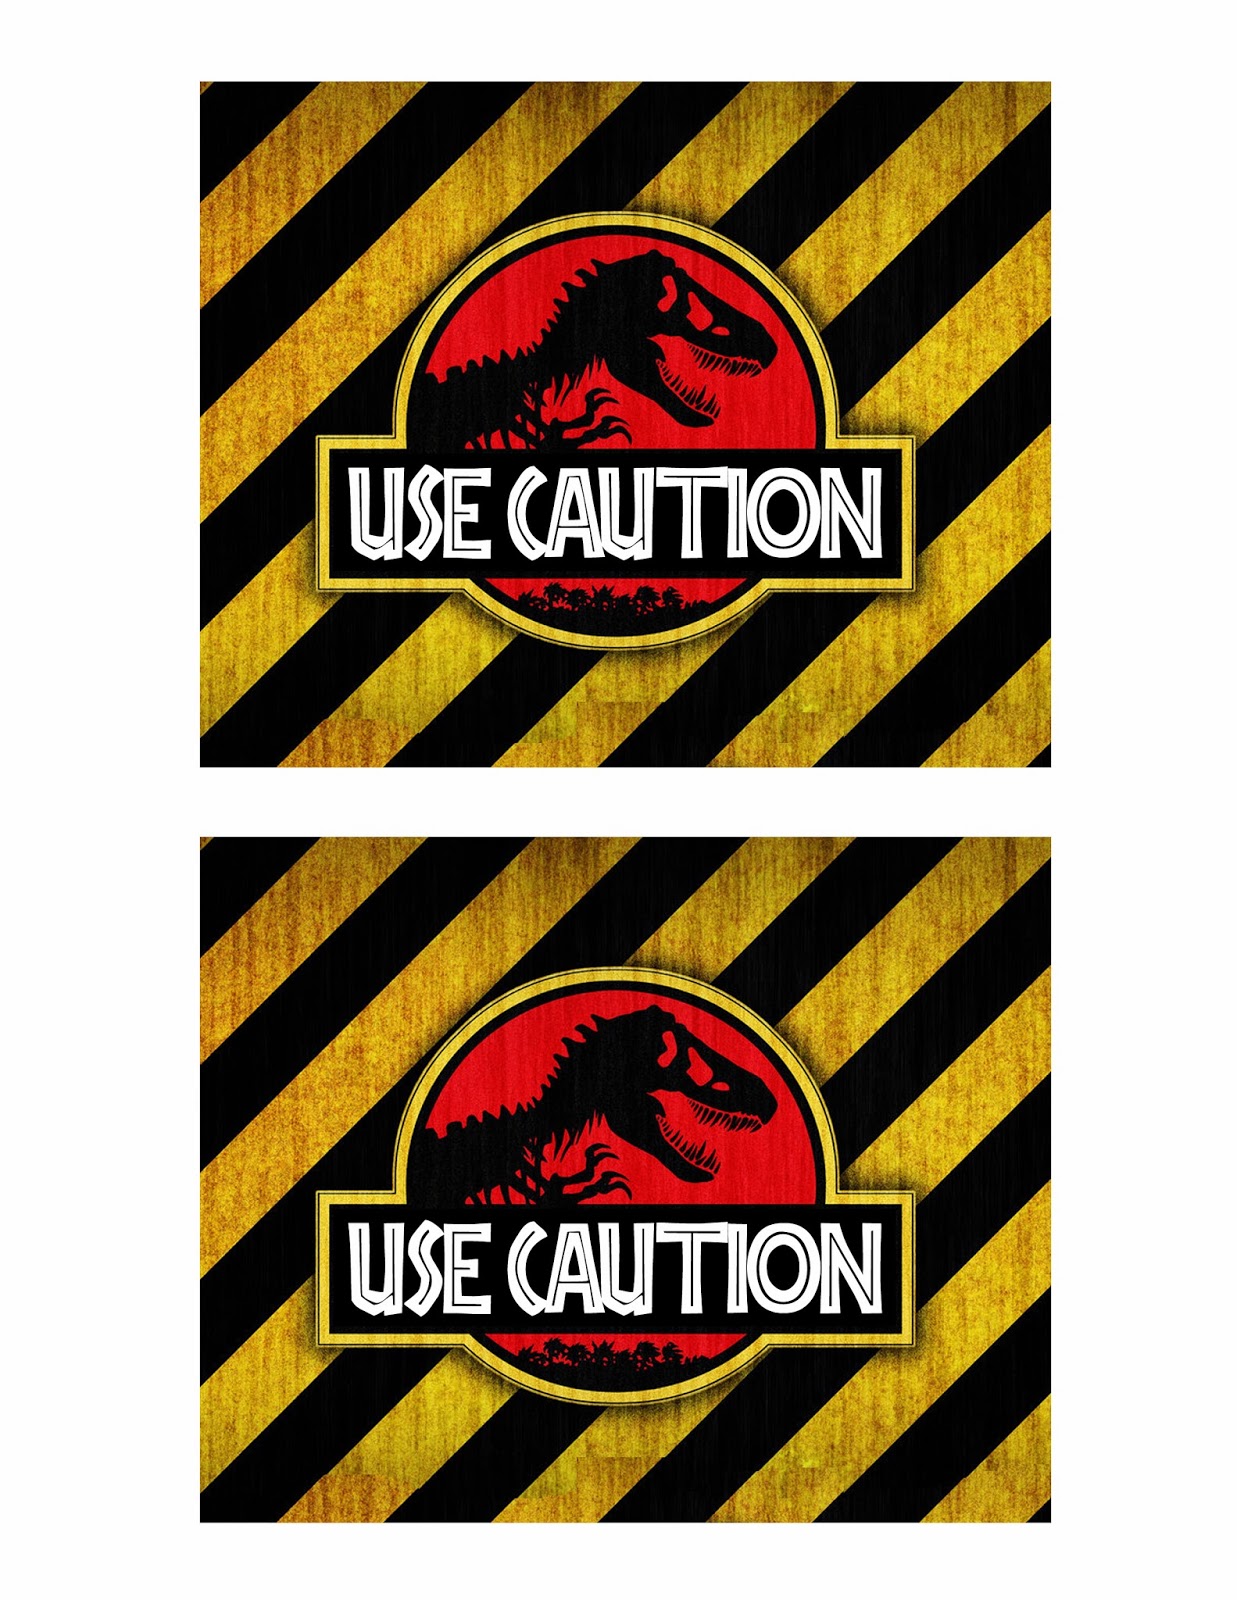 jurassic-park-party-party-printables-and-dinosaurs-on-pinterest